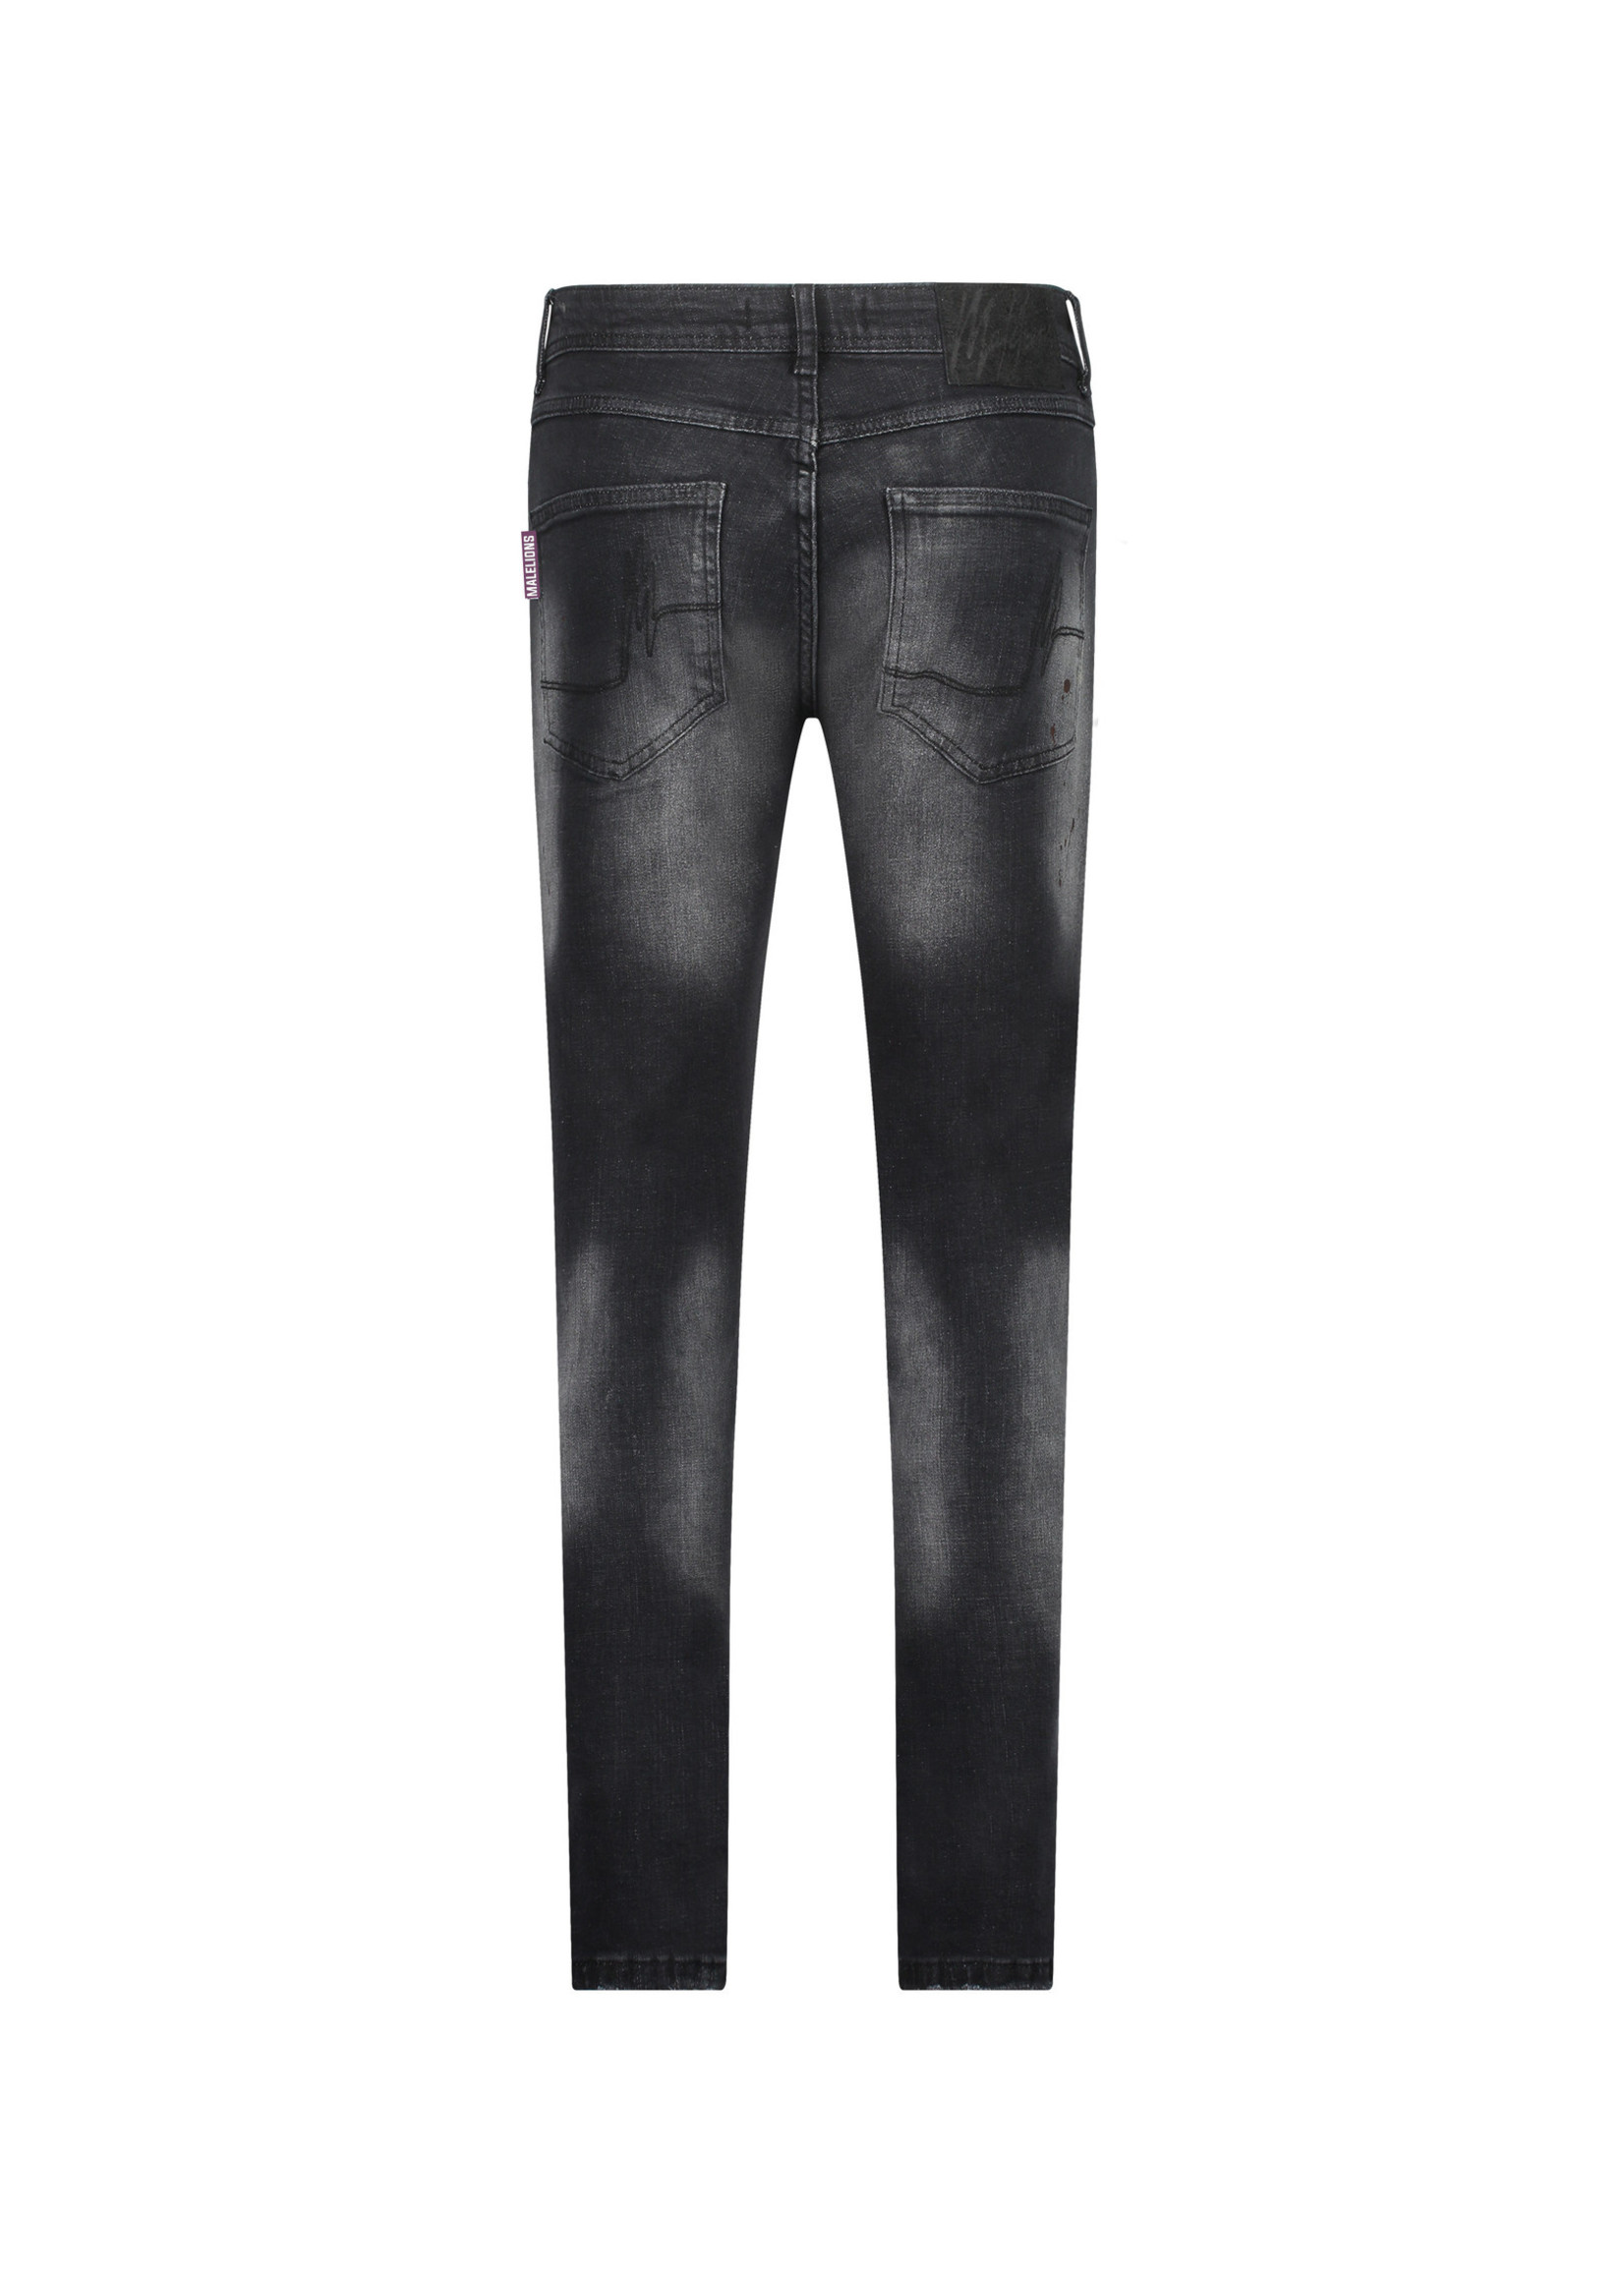 Malelions Stained Jeans Black